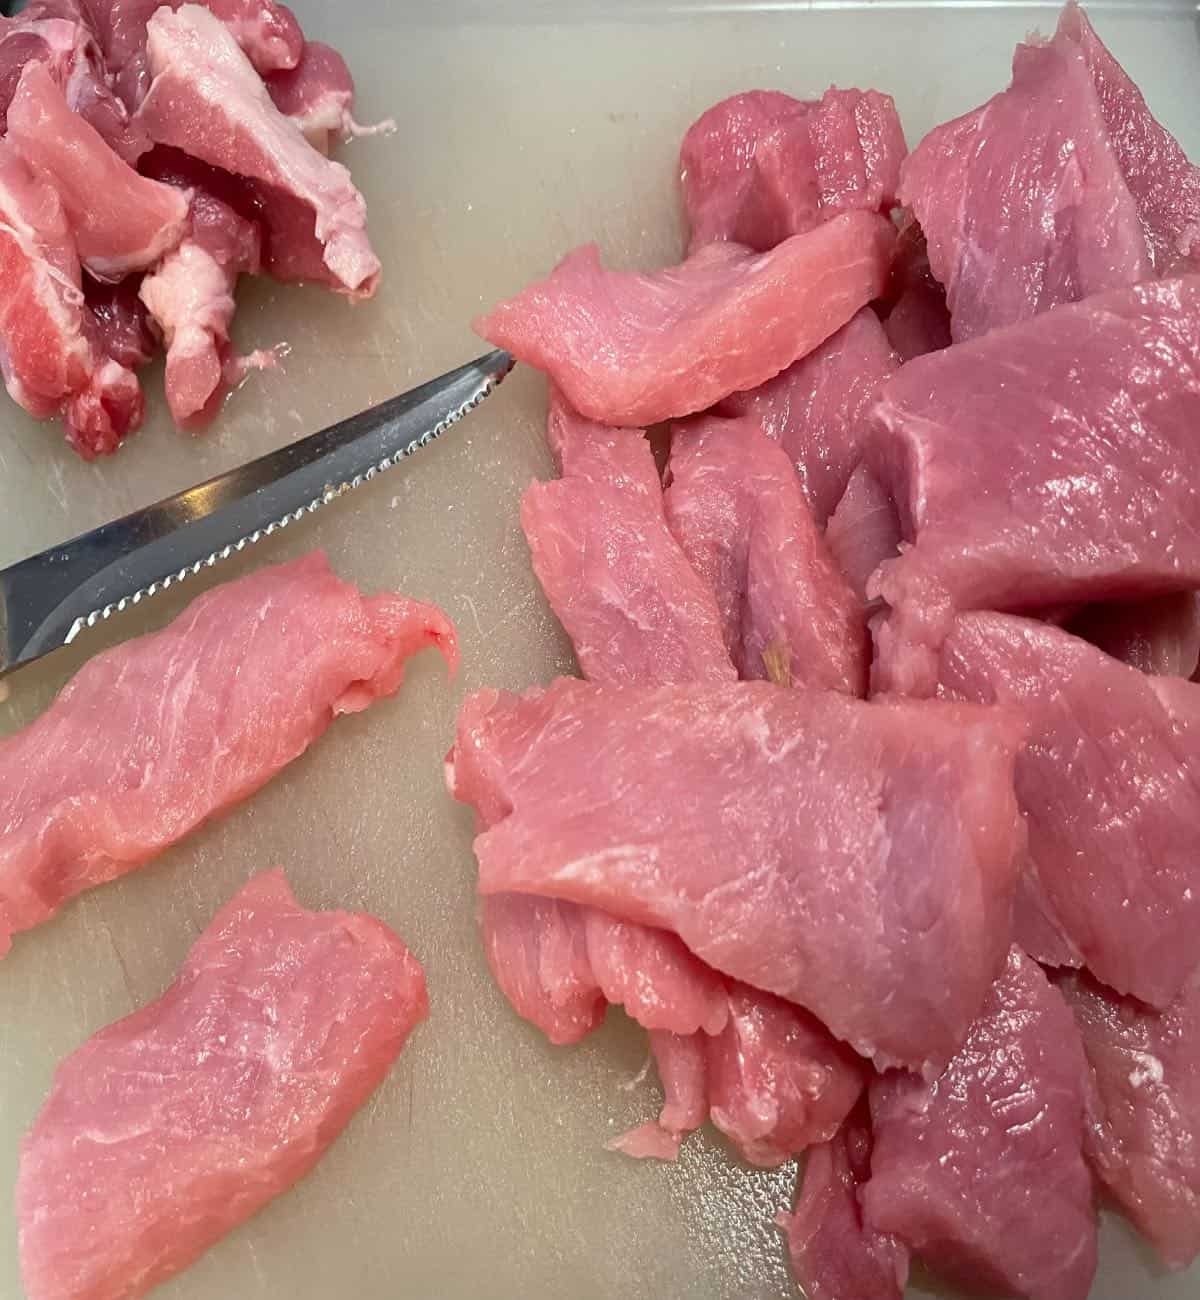 Sliced small pieces of pork chops on a cutting board with the fat removed.